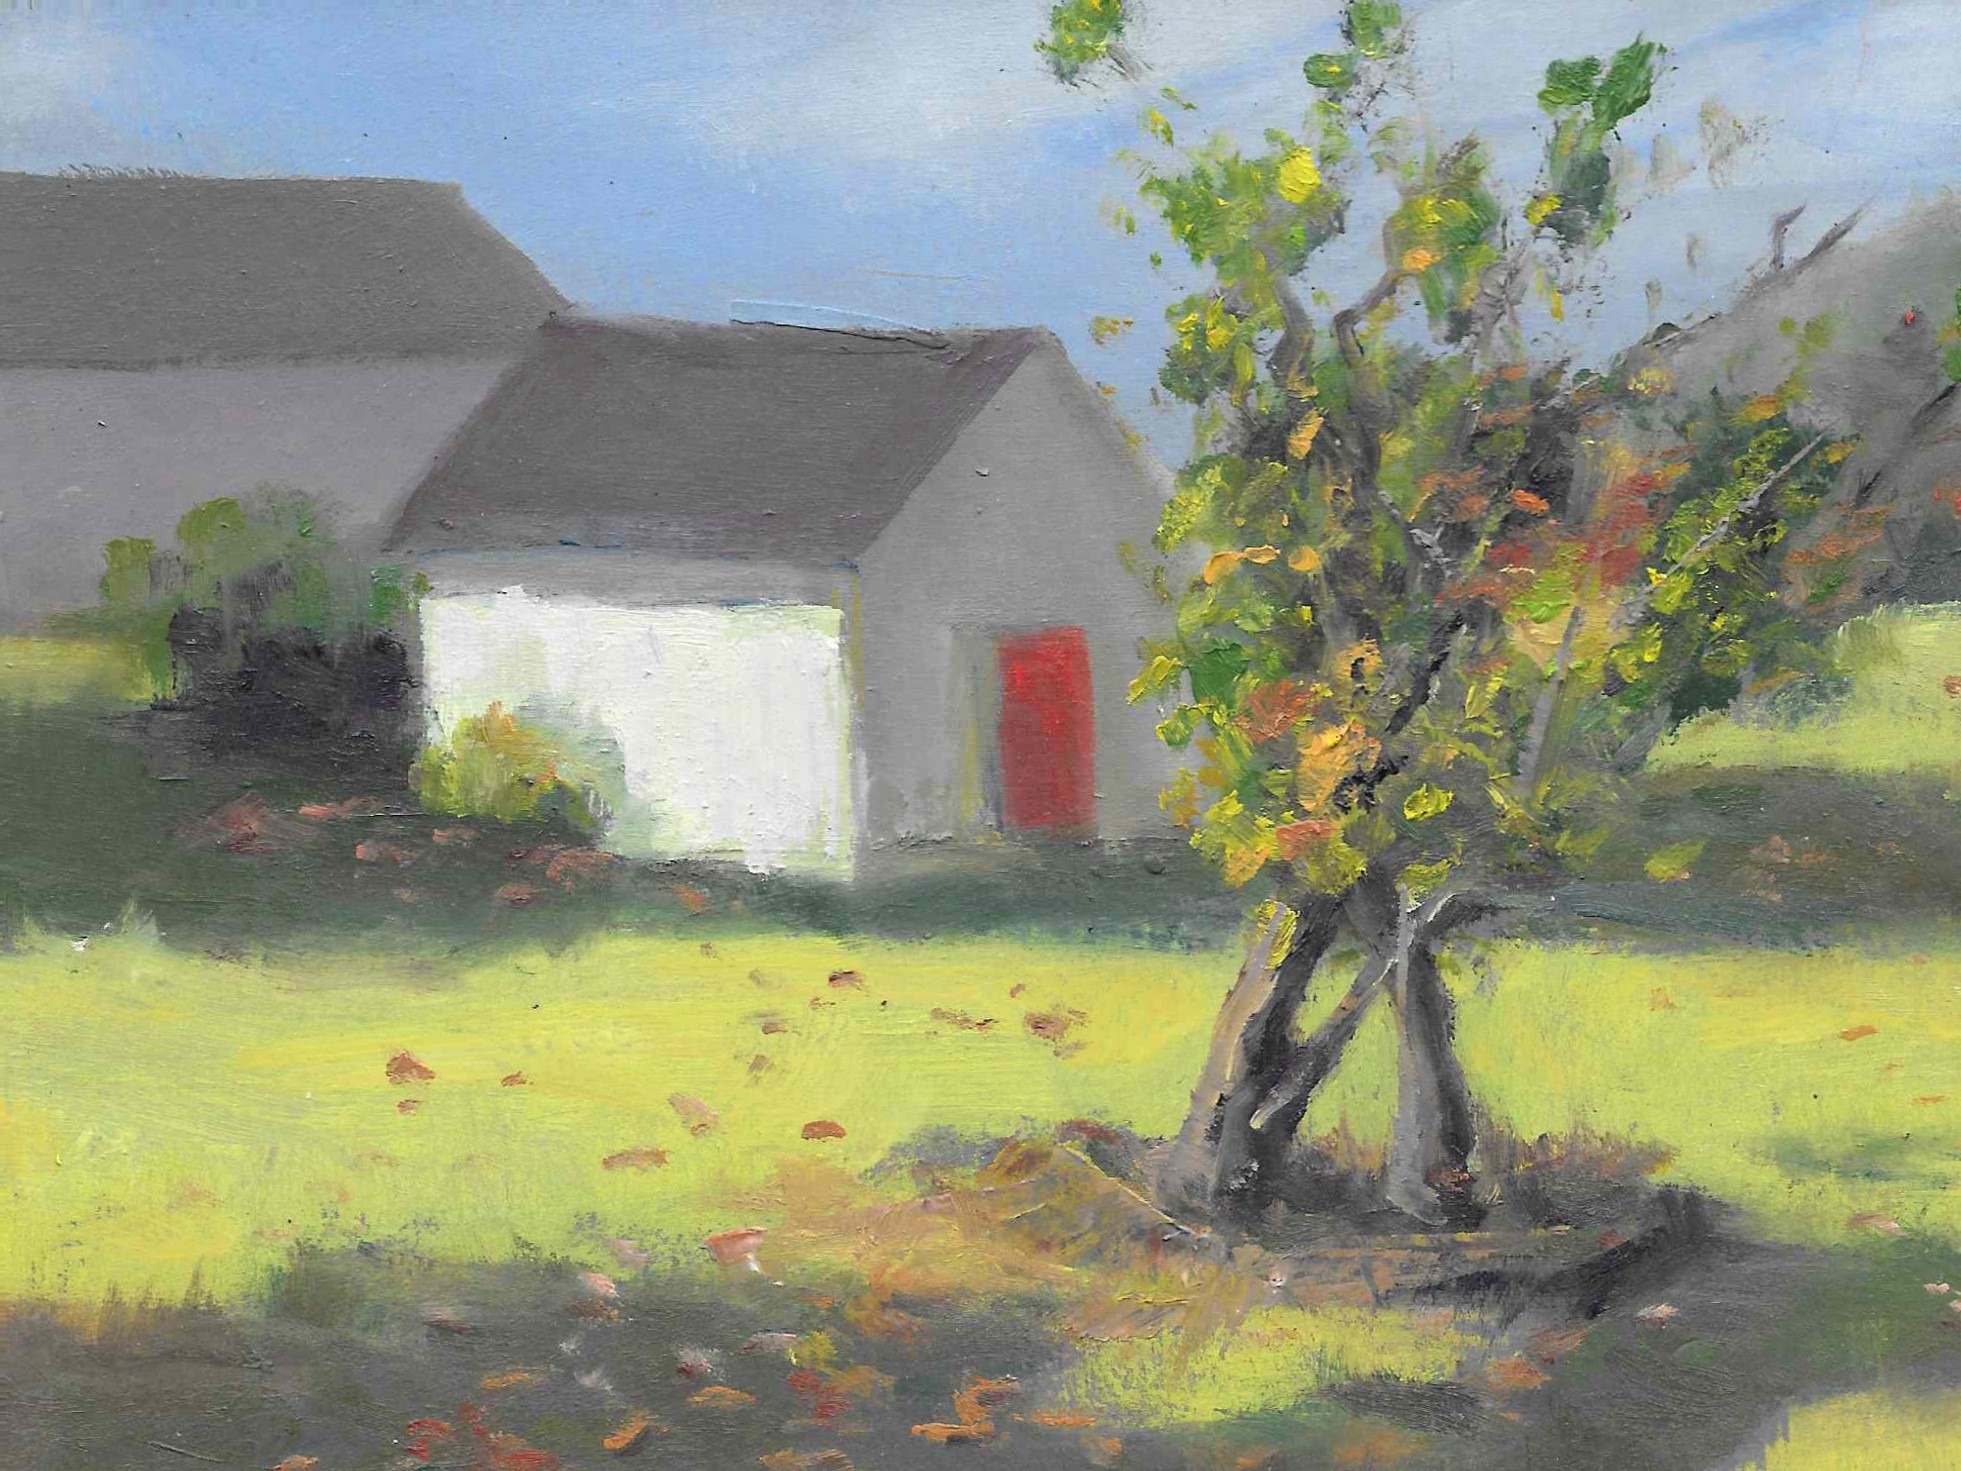 Asf light on the writers shed washingtons crossing oil on paper 5x7 gekmkq